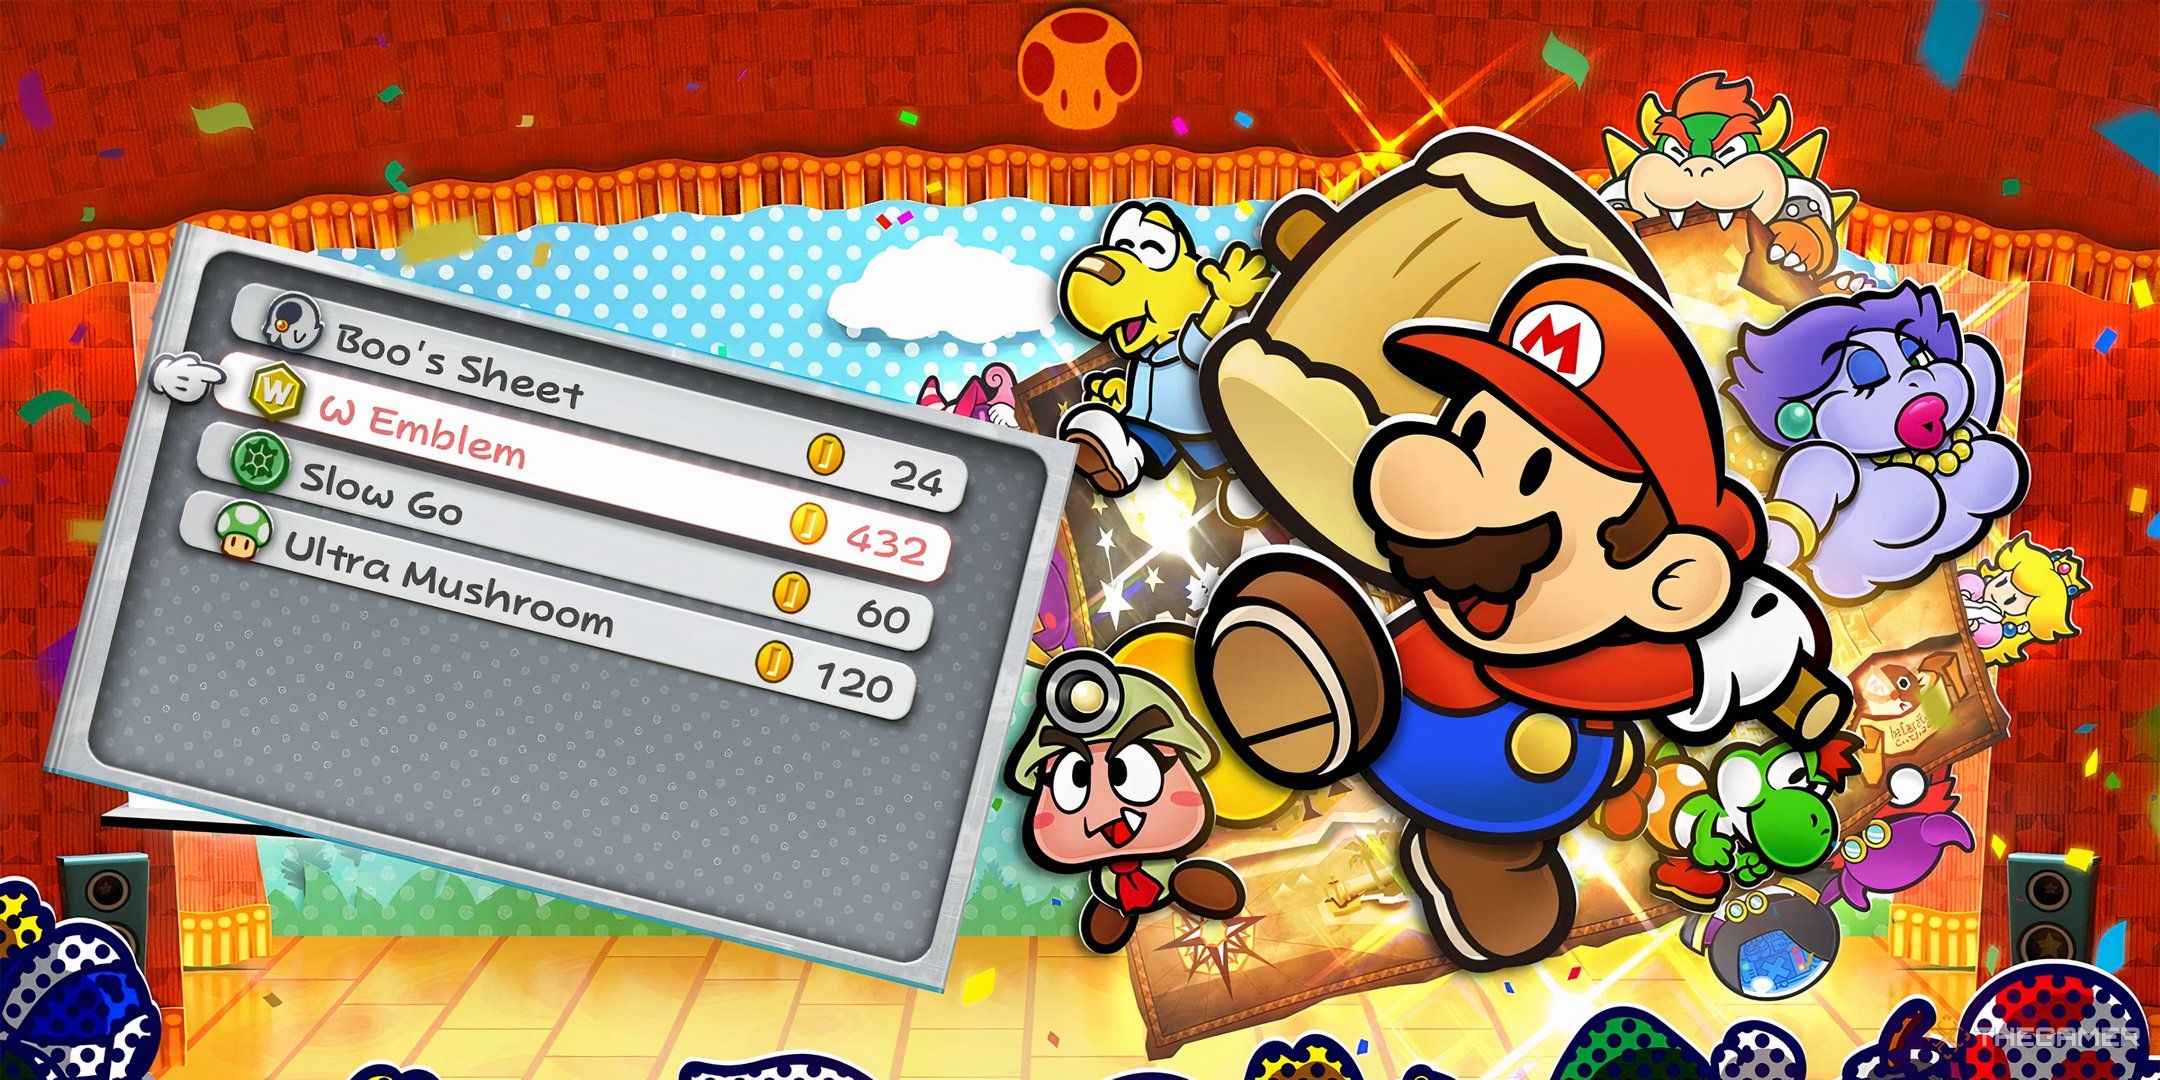 Paper Mario using his hammer on the W Emblem price.